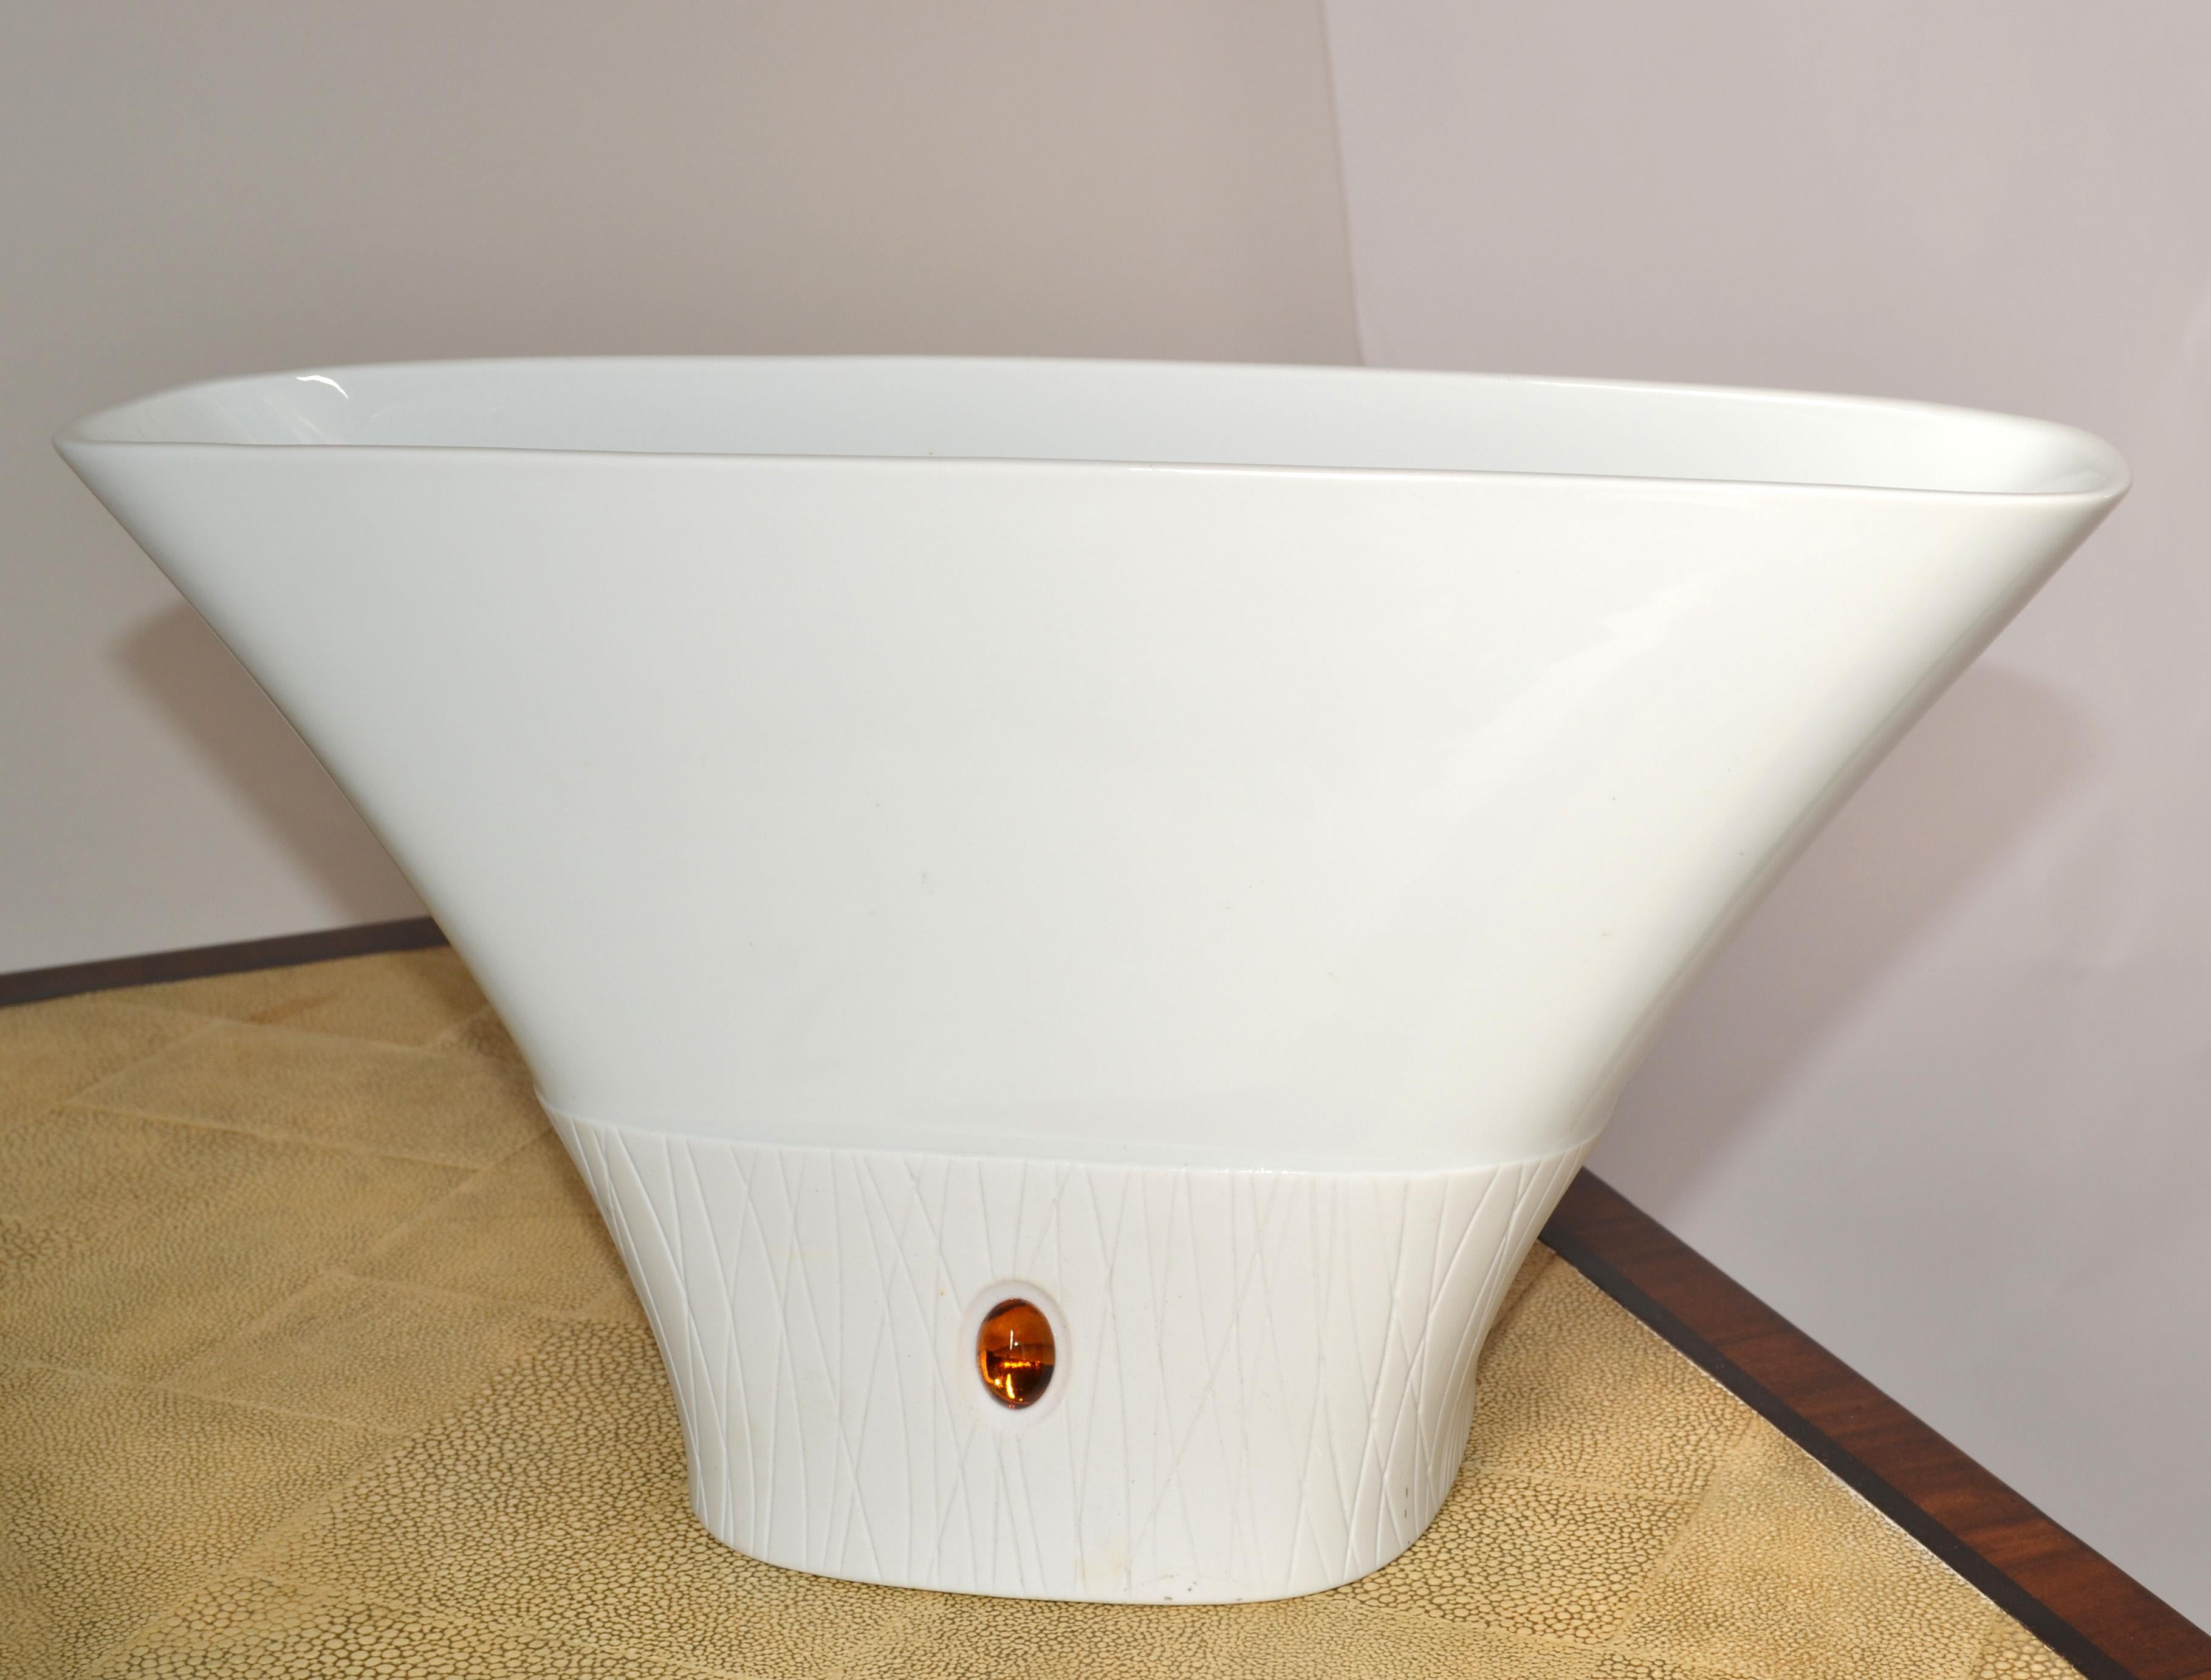 Decorative white textured porcelain vase with amber golden sandstone inlay.
Handmade Porcelain Vase with Character an elegant decorative Gem by itself.  
Trademark at the Base, FÜRSTENBERG Germany.
The opening measures: 13 x 3 inches.
The care and